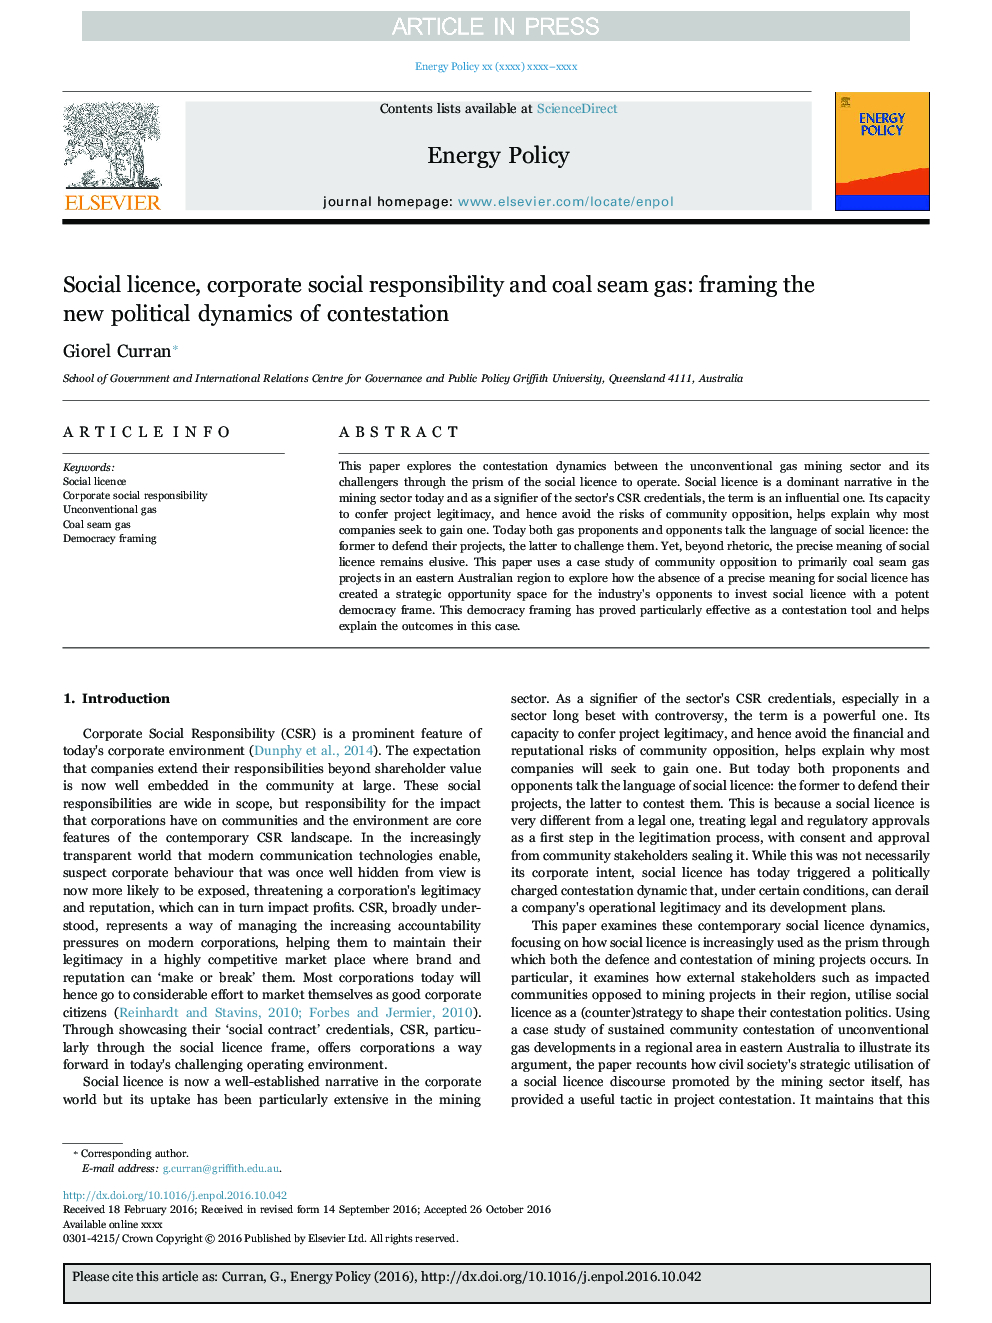 Social licence, corporate social responsibility and coal seam gas: framing the new political dynamics of contestation